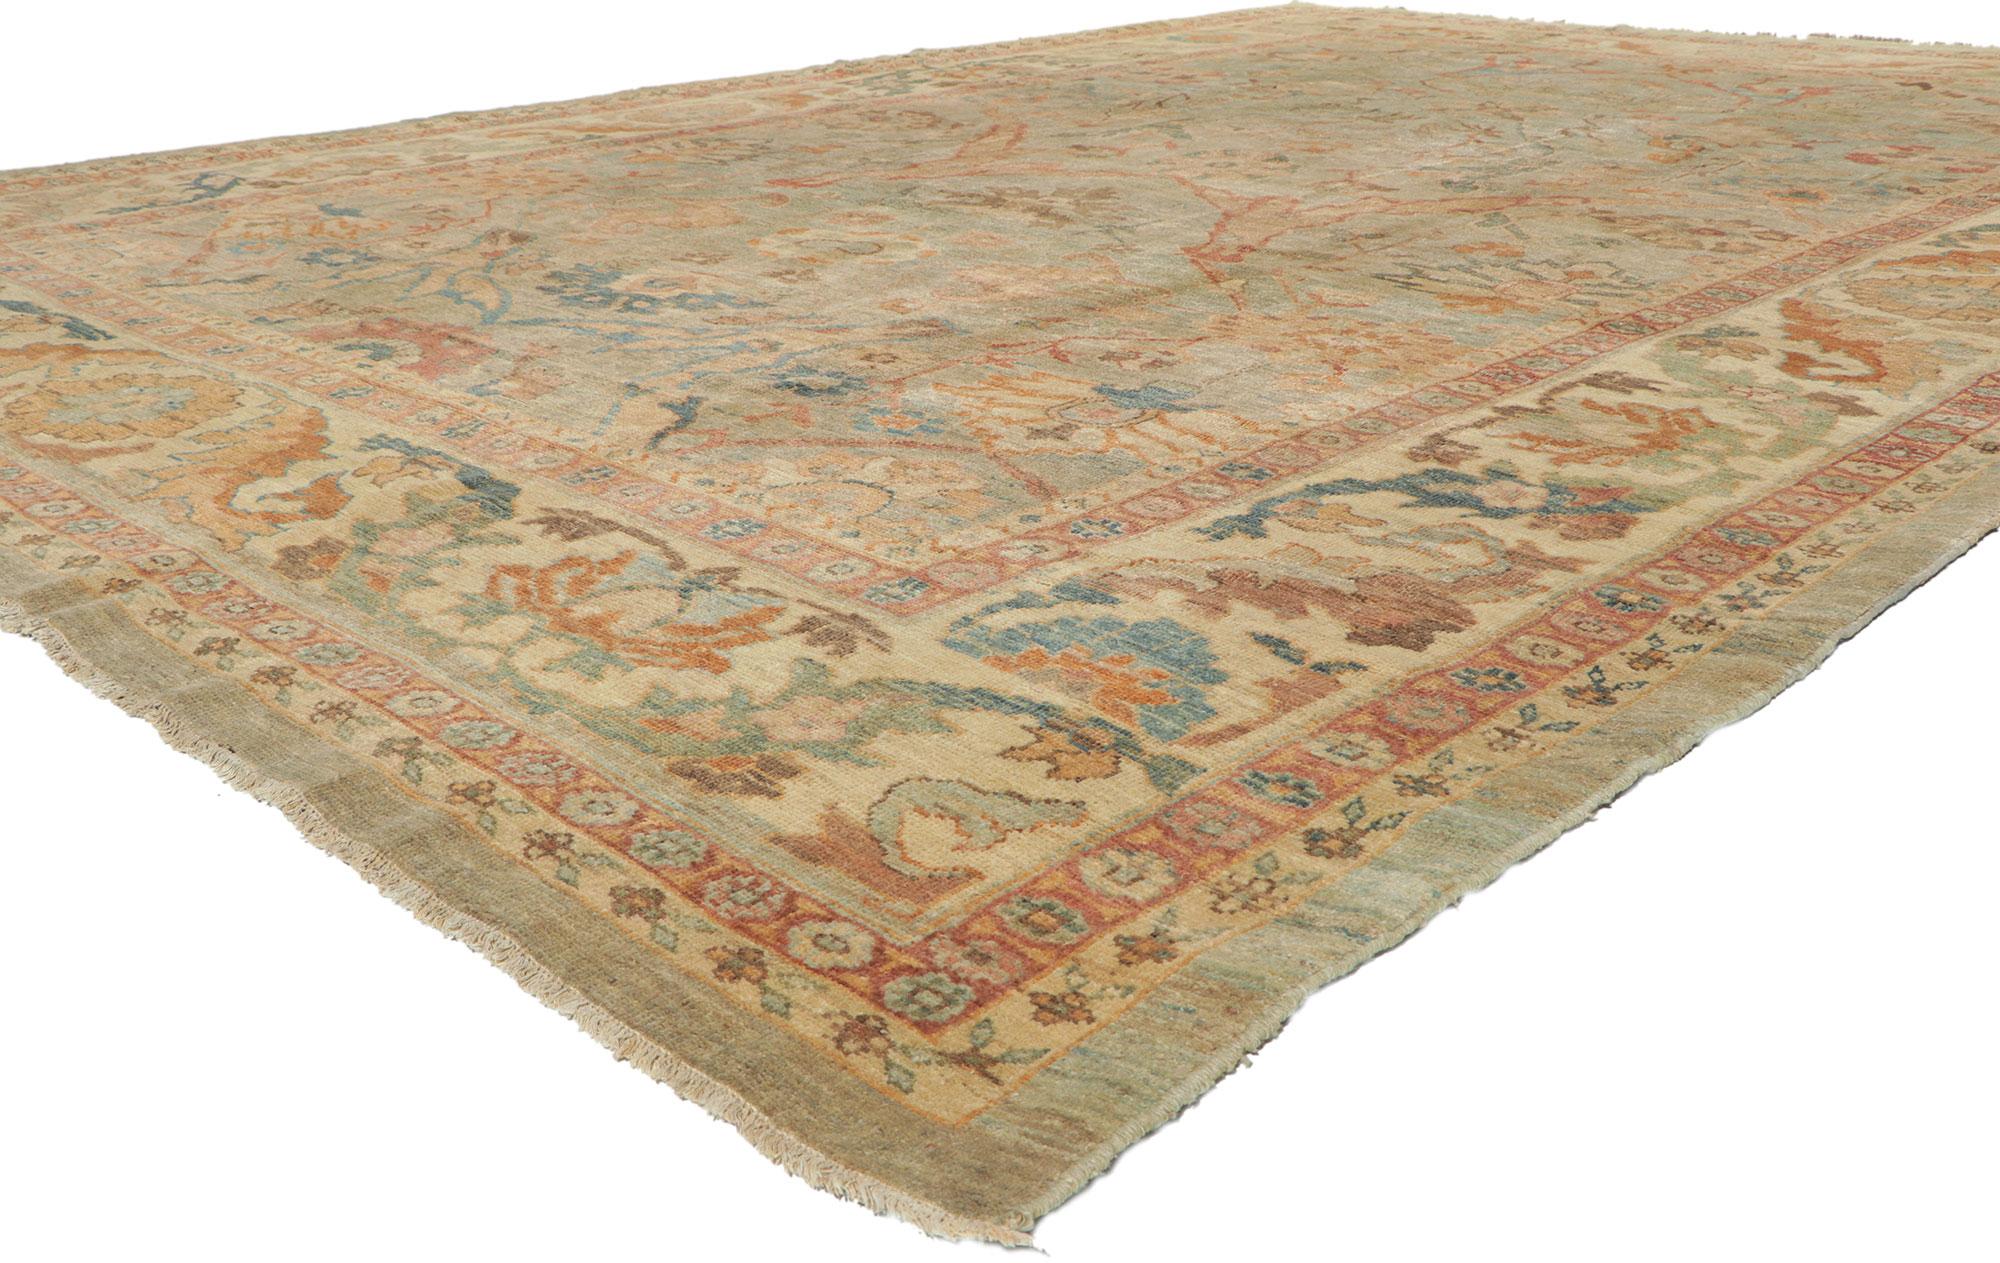 76555 New Neoclassical Style Turkish Oushak Area Rug, Oversized Rug. Embodying the highly decorative Neoclassical style and transitional colors sought by many, this new Turkish Oushak area rug highlights a visually striking composition. Featuring a